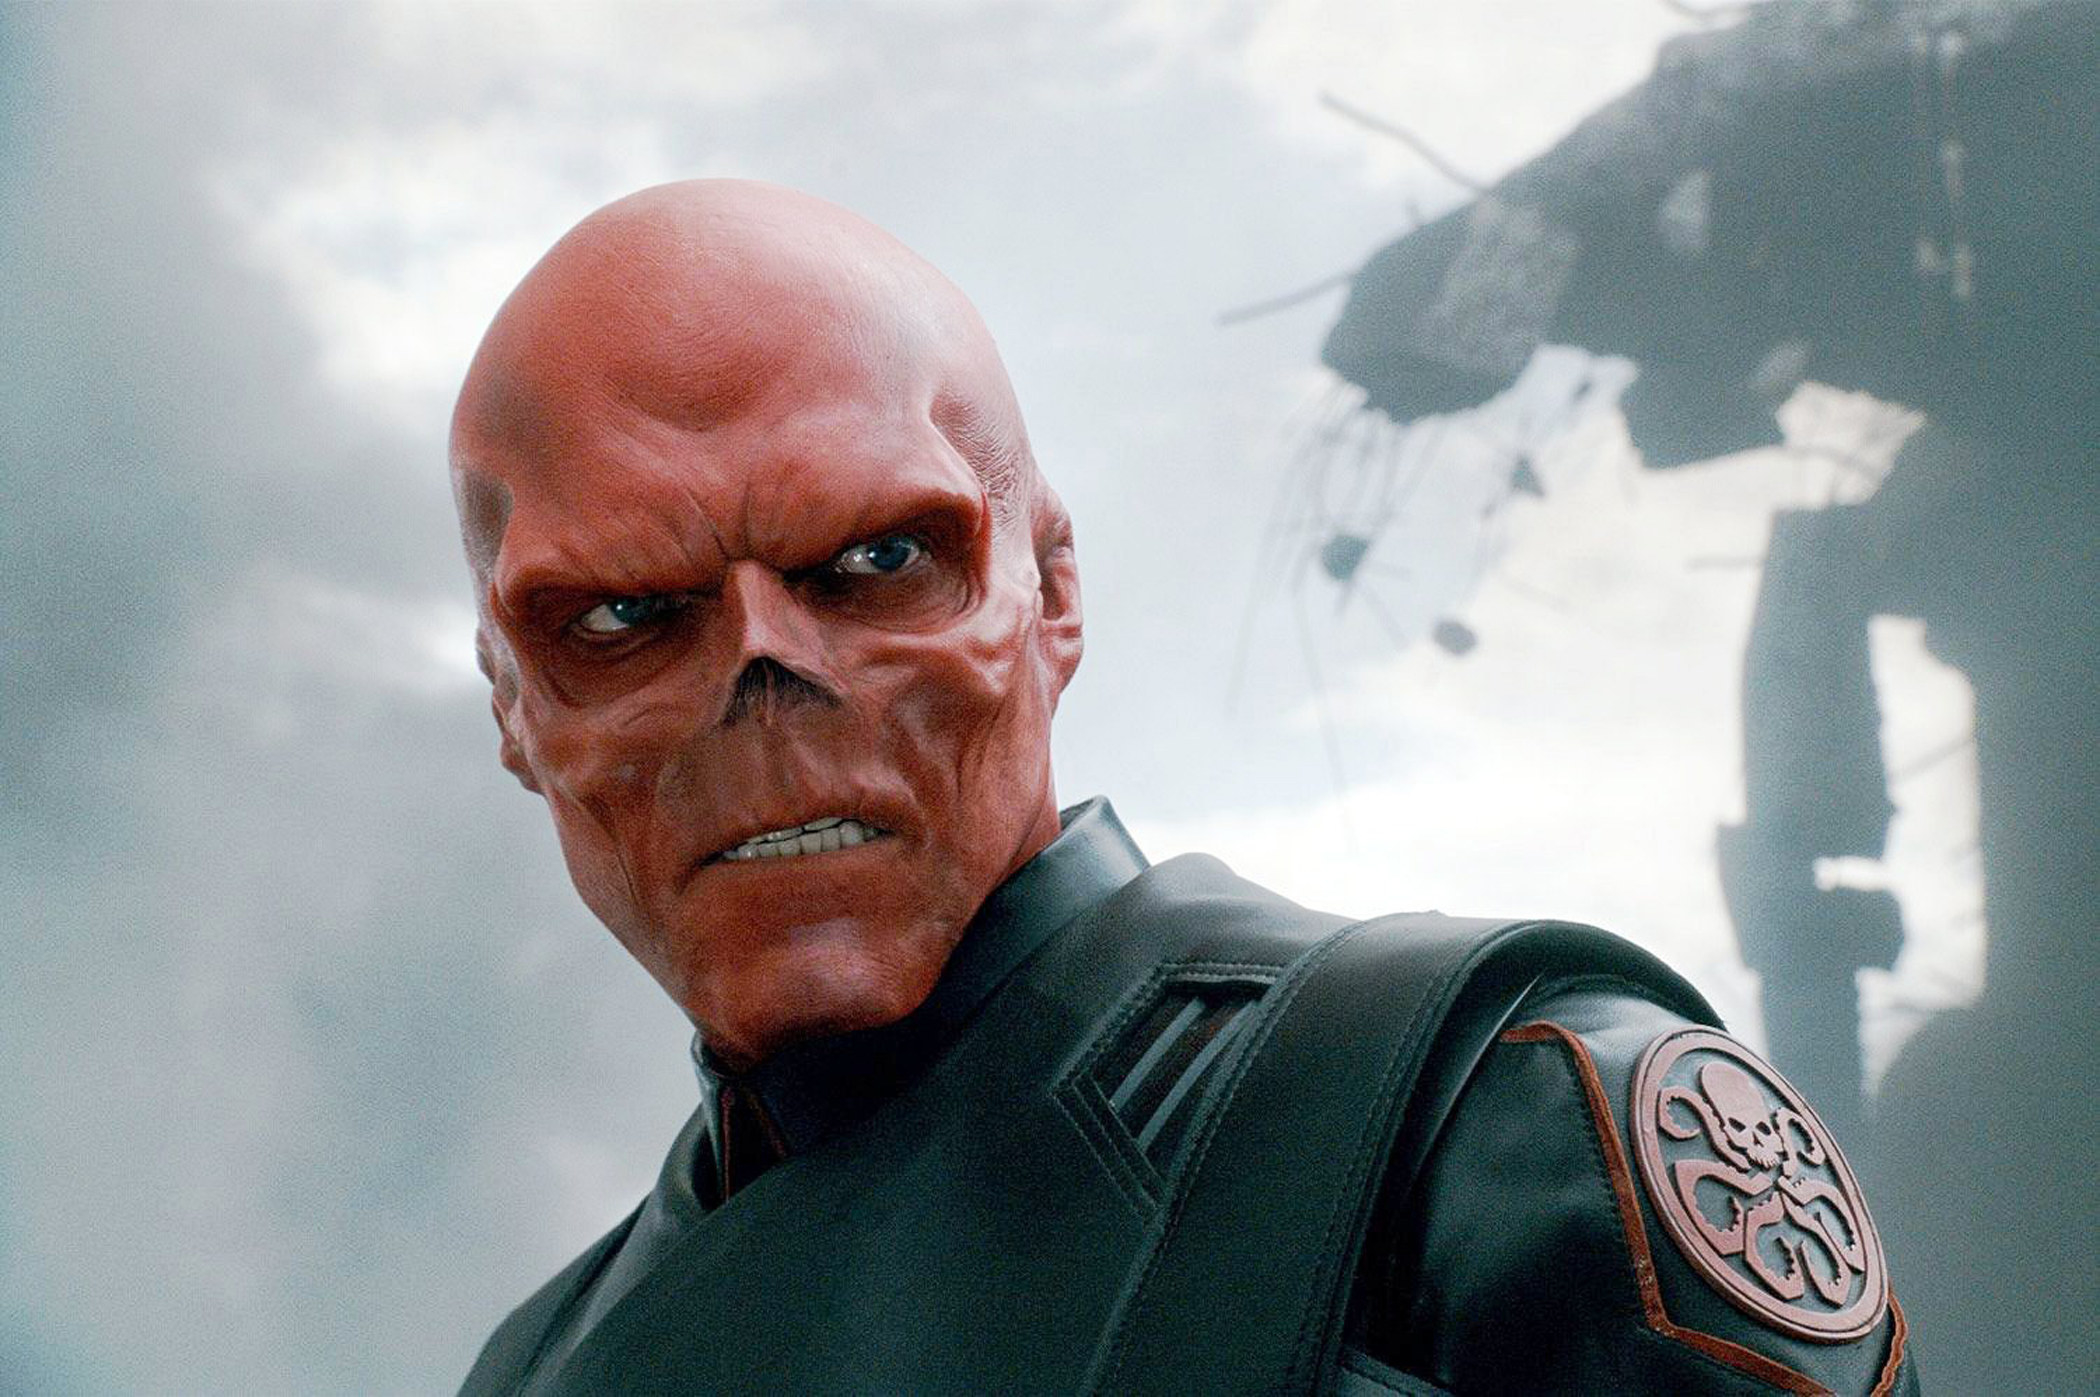 wearing his Hydra-branded jacket, Red Skull glares as his lab explodes behind him